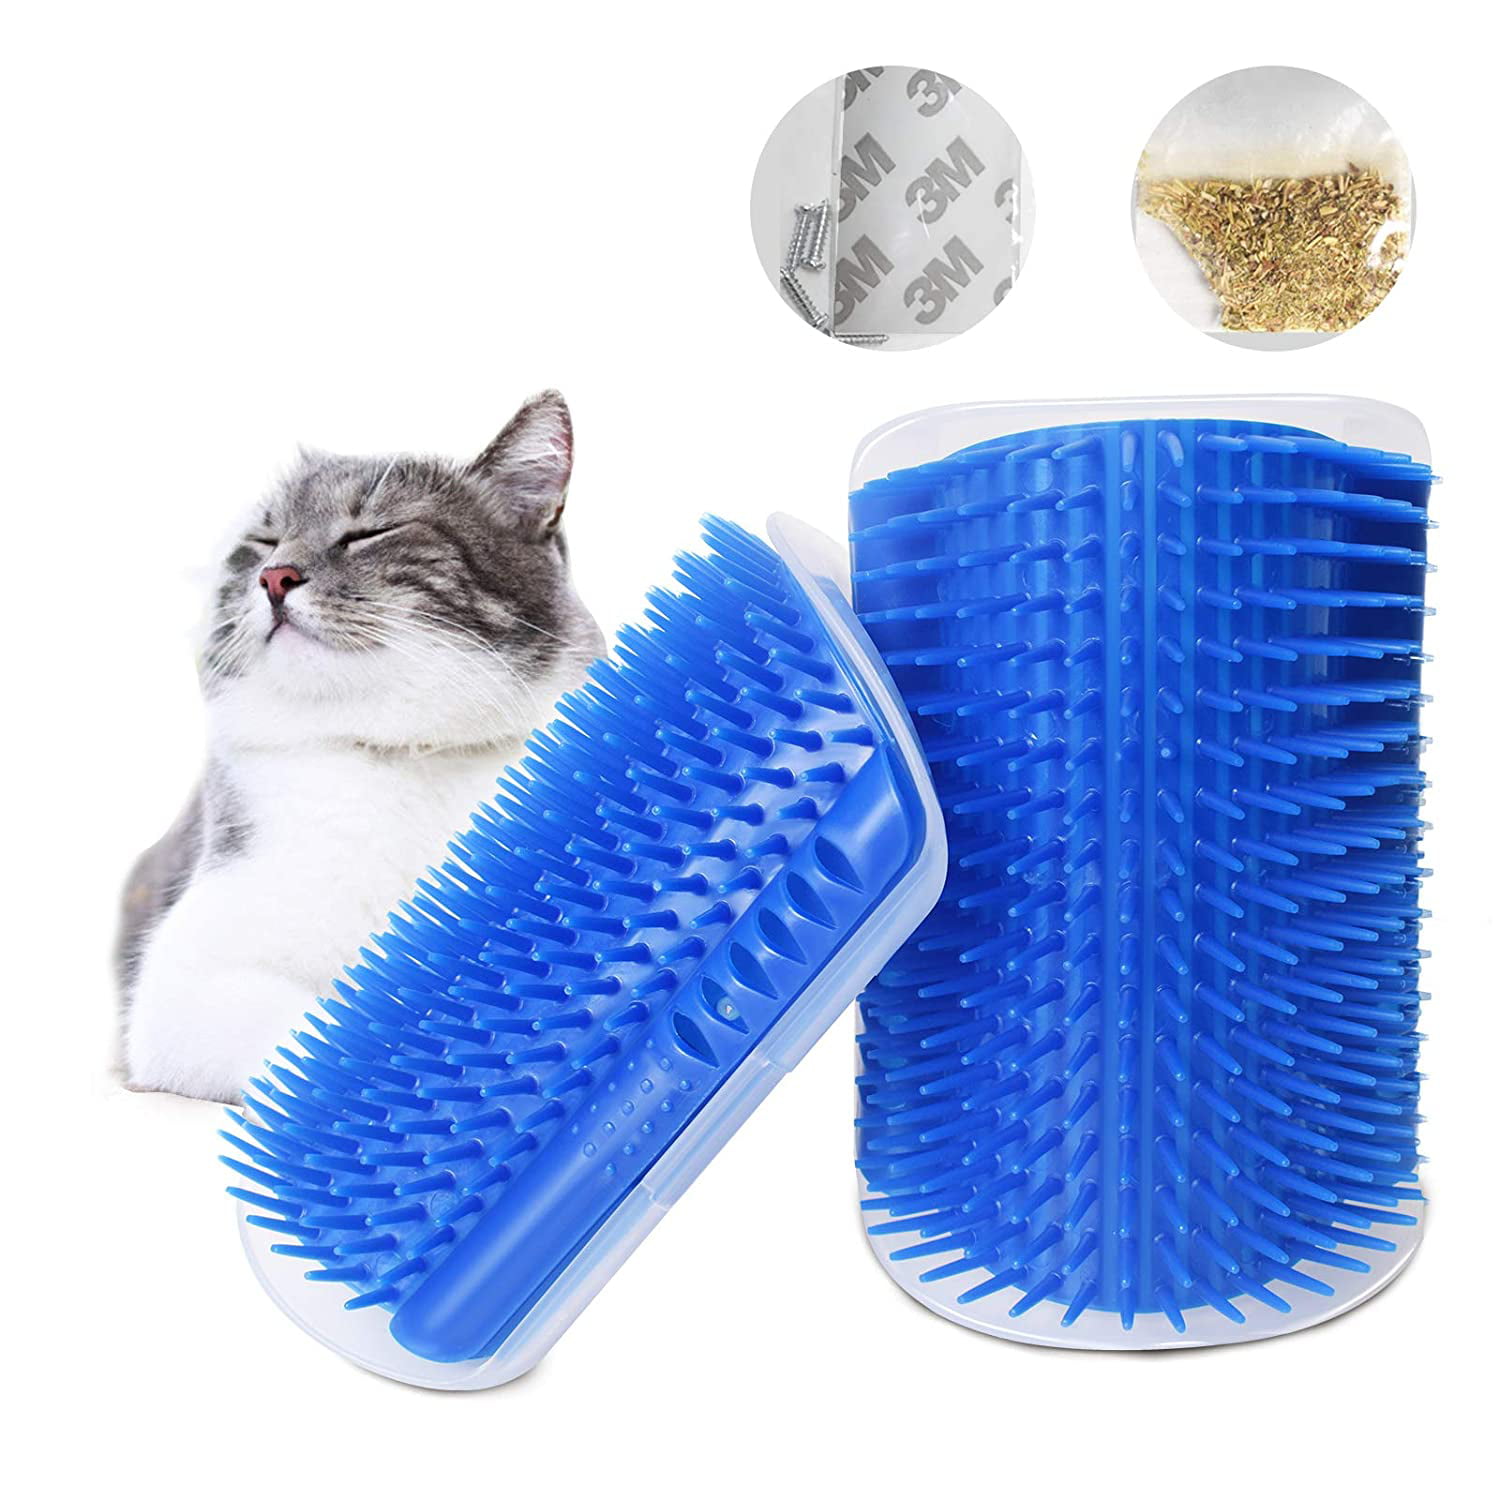 for Long & Short Fur Cats/Dogs 2-Pack Black Wall Corner Massage Comb TabEnter Cat Self Groomer With Catnip Grooming Brush Helps Prevent Hairballs and Controls Shedding